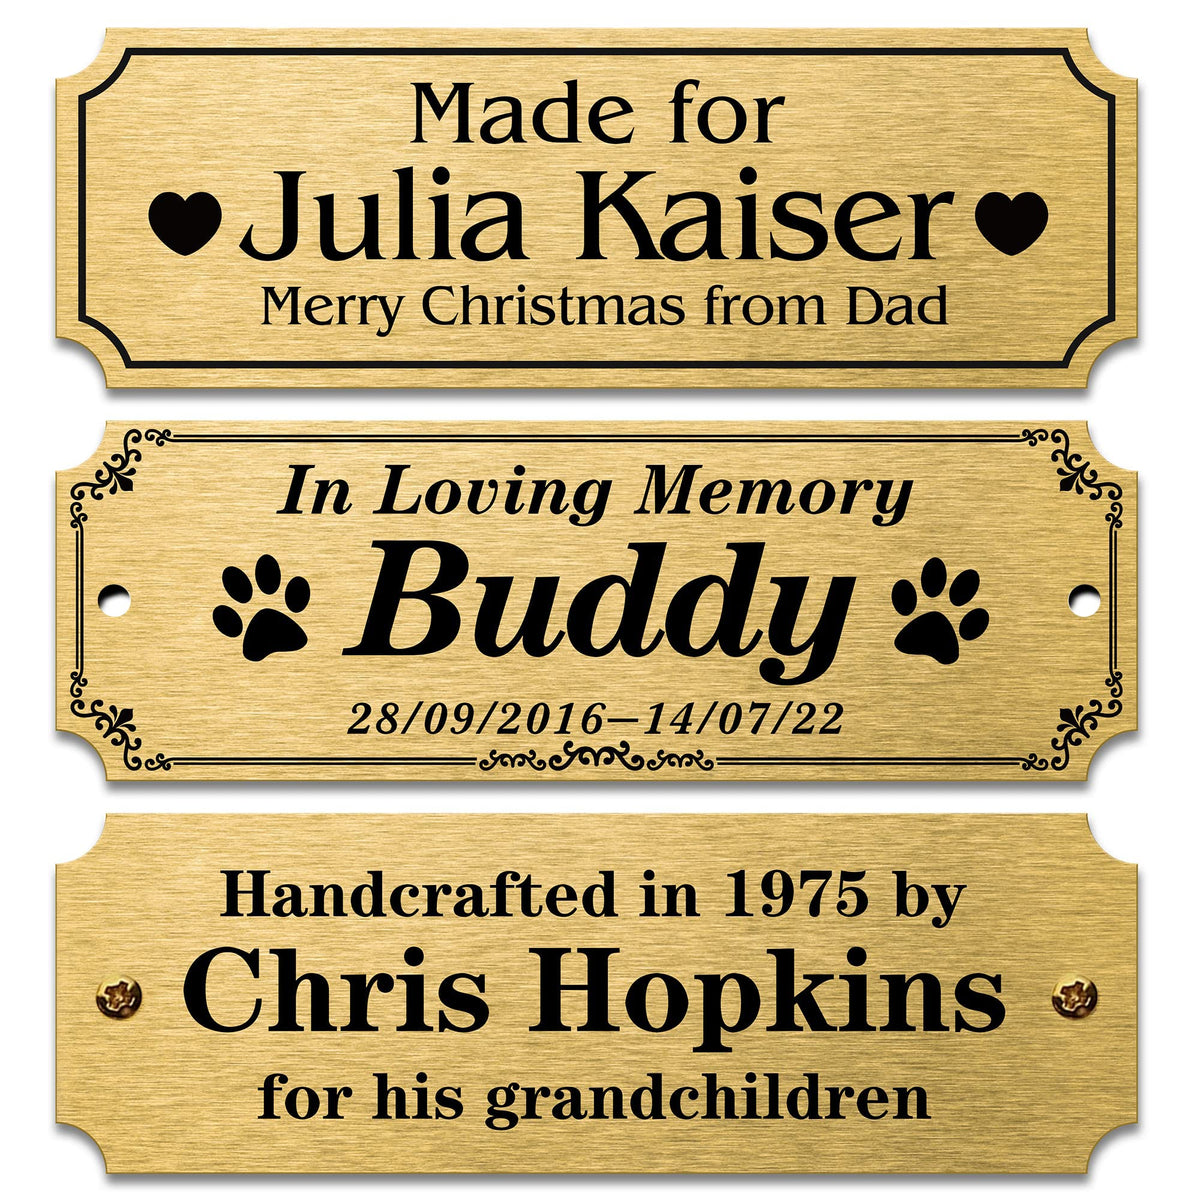 Personalized Name Plates, Solid Brass Engraved Plaque, Trophy Plates Engraved, Custom Name Plate with Adhesive Backing or Screws, 3" W x 1" H